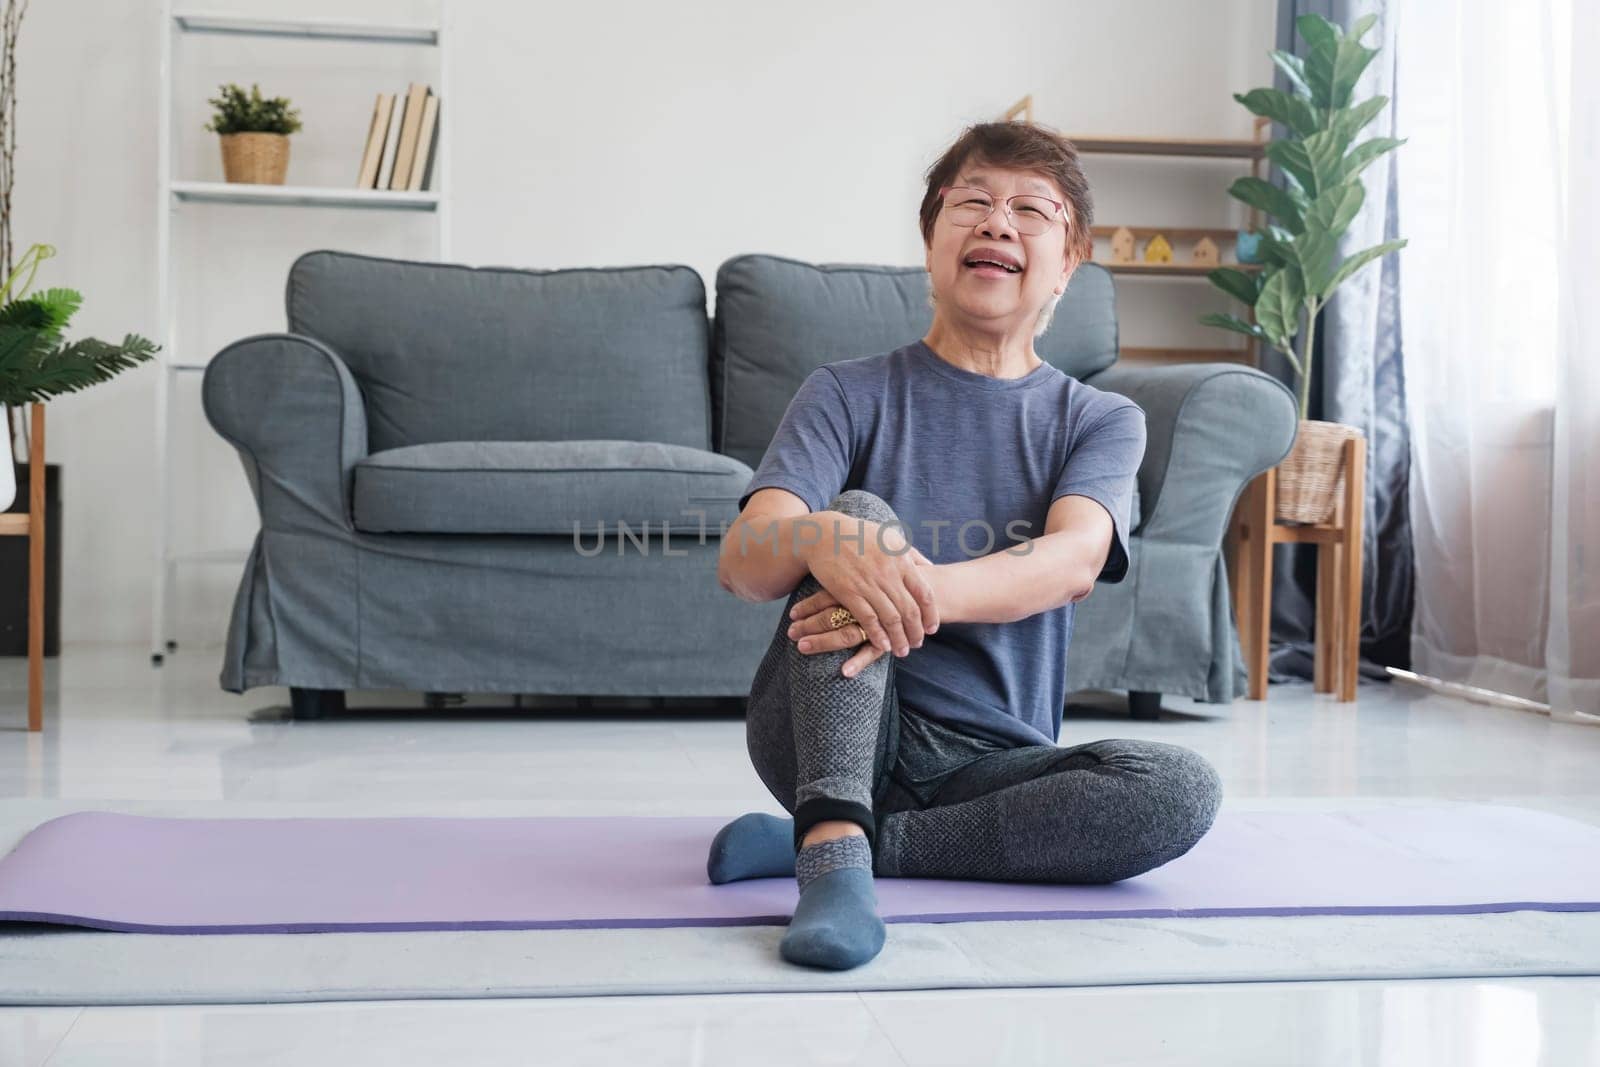 Healthy lifestyle and aging concept. Balance in life. Senior woman relaxing and laughing when finish stretching exercise yoga in living room at home.